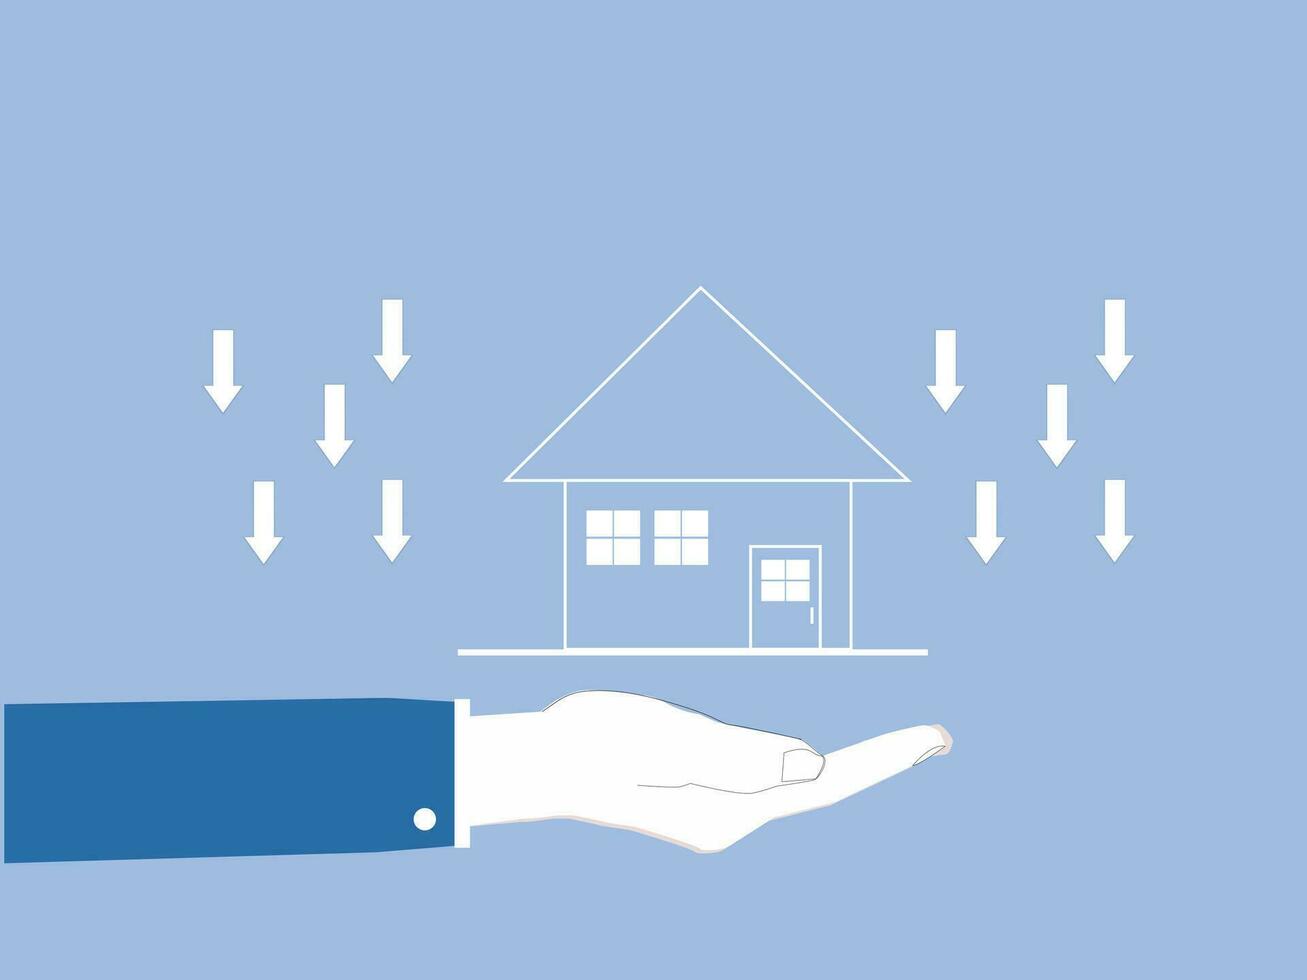 Businessman's hand and house illustration with downward arrows. vector illustration.